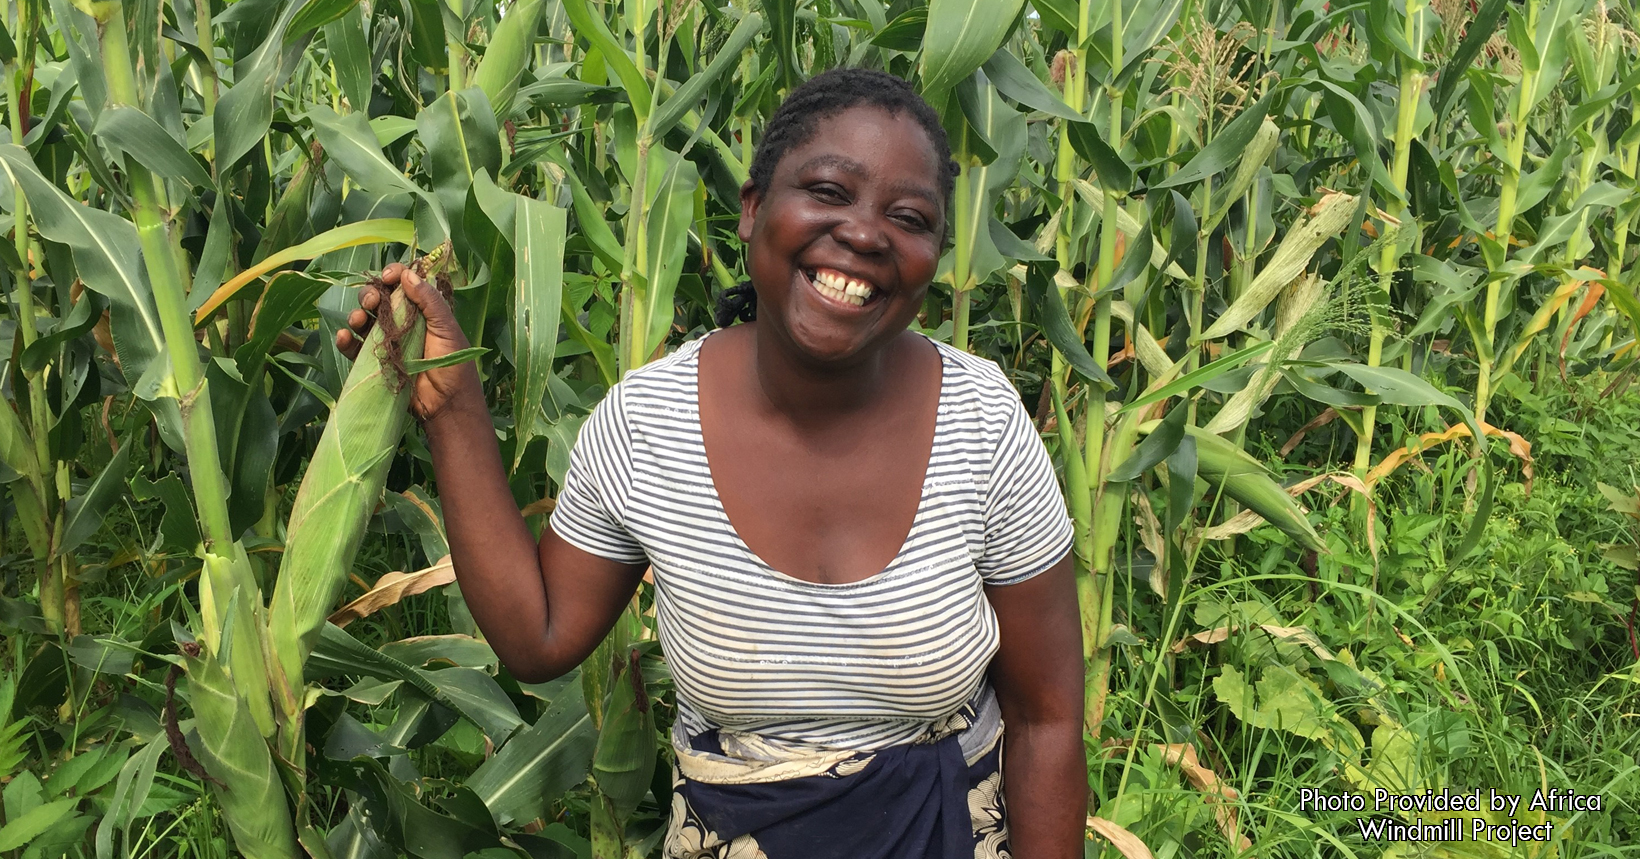 Mercy Kamdambo is a single mother of 4 children. She is the lead farmer in her village and got her first windmill in 2020.